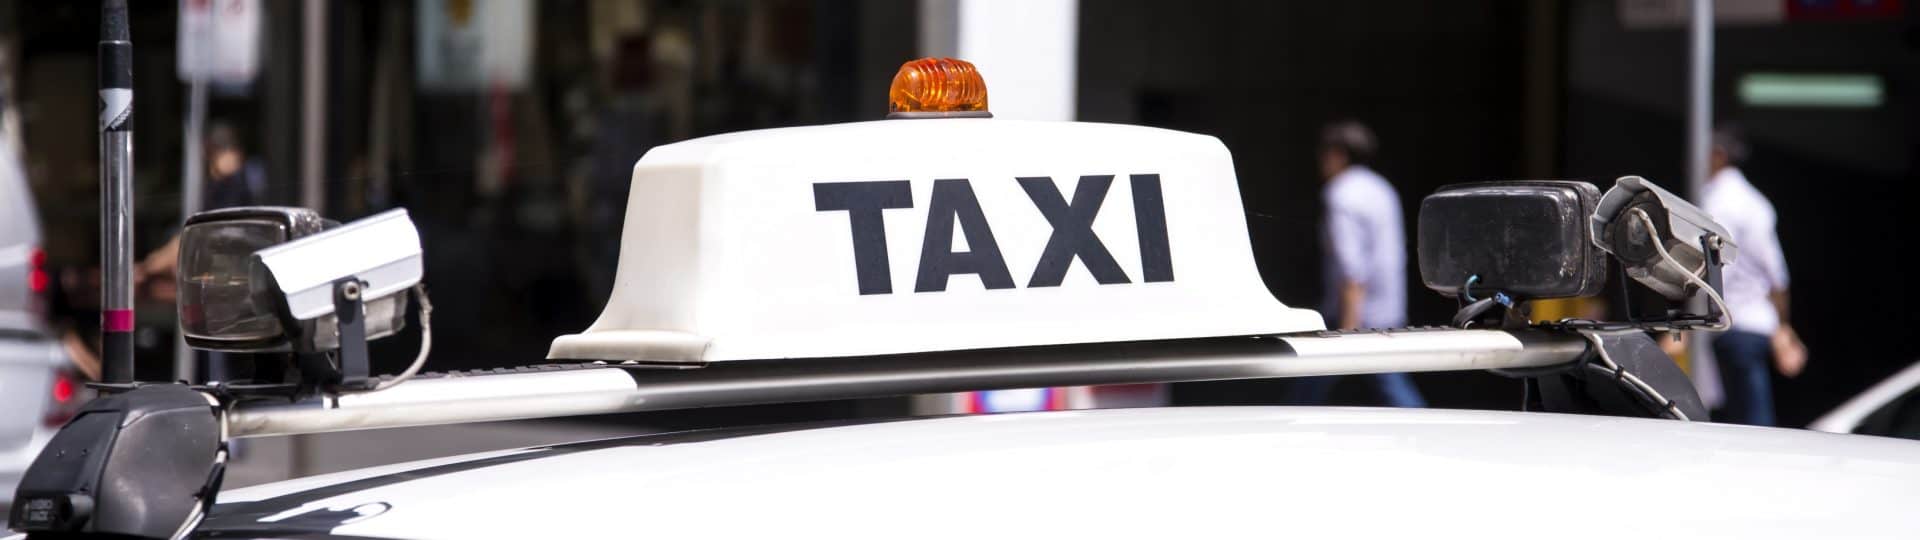 Supreme Court of Queensland confirms that a “minor” collision does not mean minor injuries - Taxi Driver awarded substantial damages